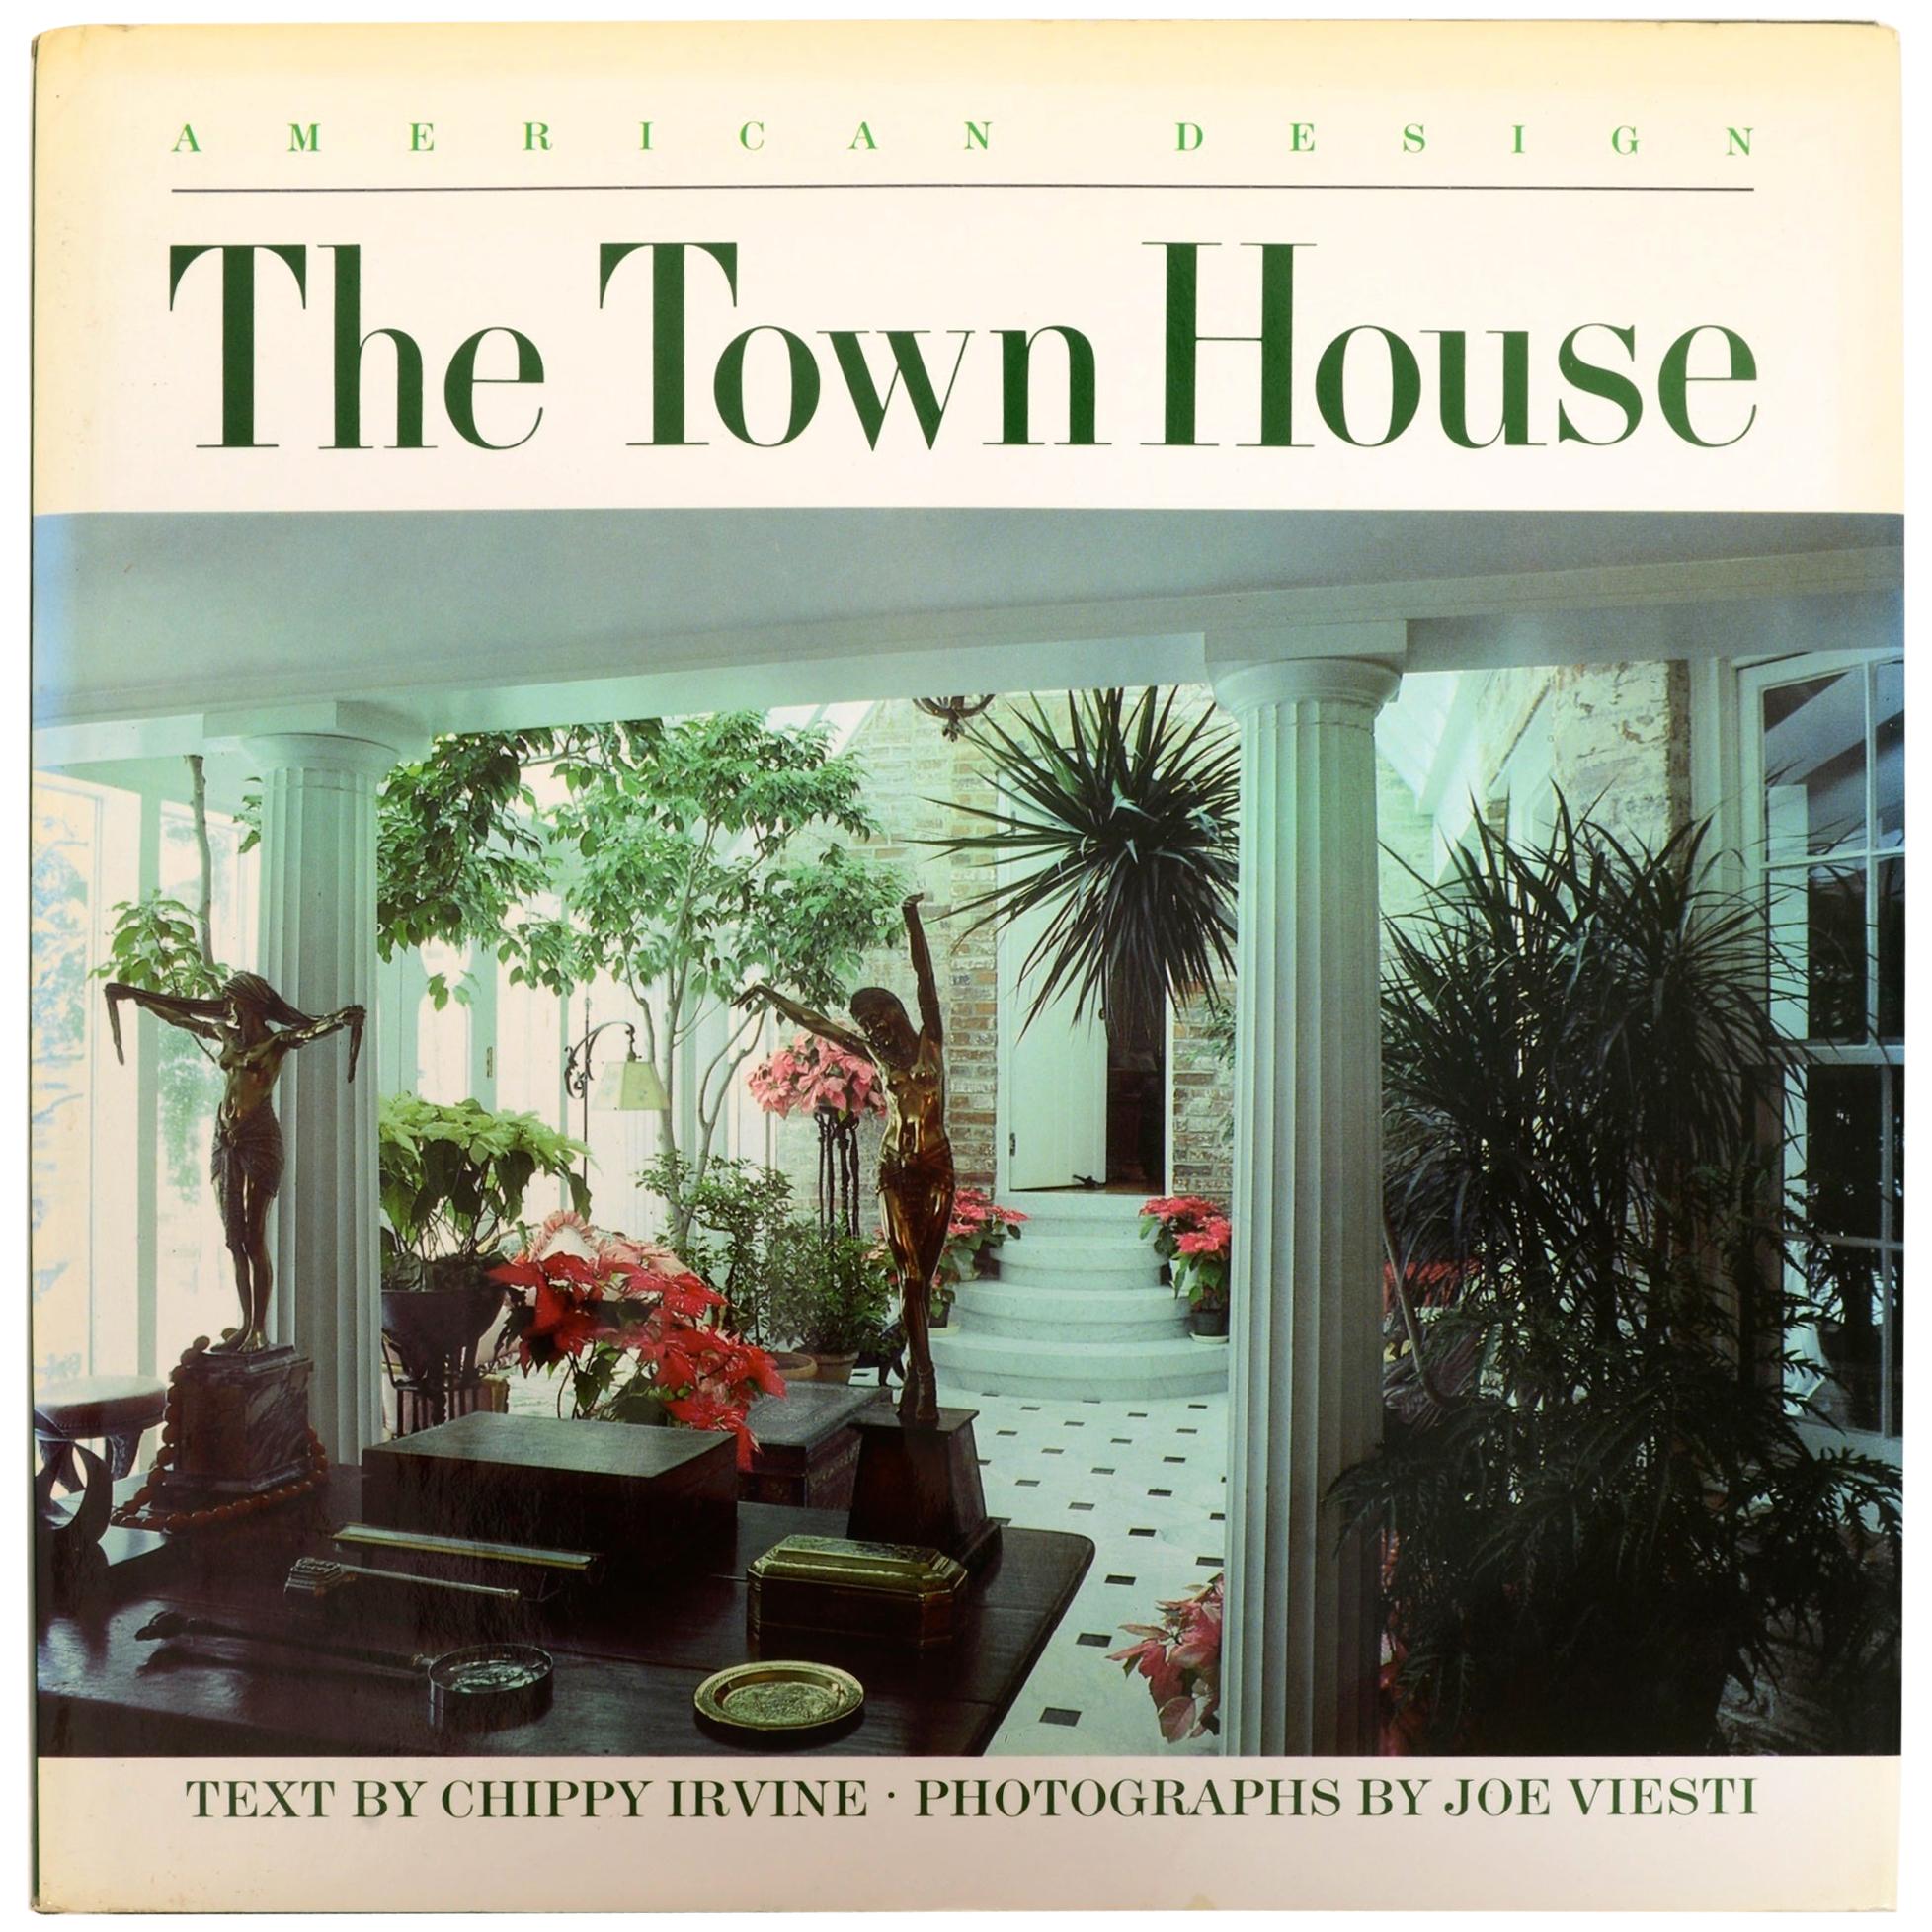 The Town House American Design Series by Chippy Irvine, 1st Ed